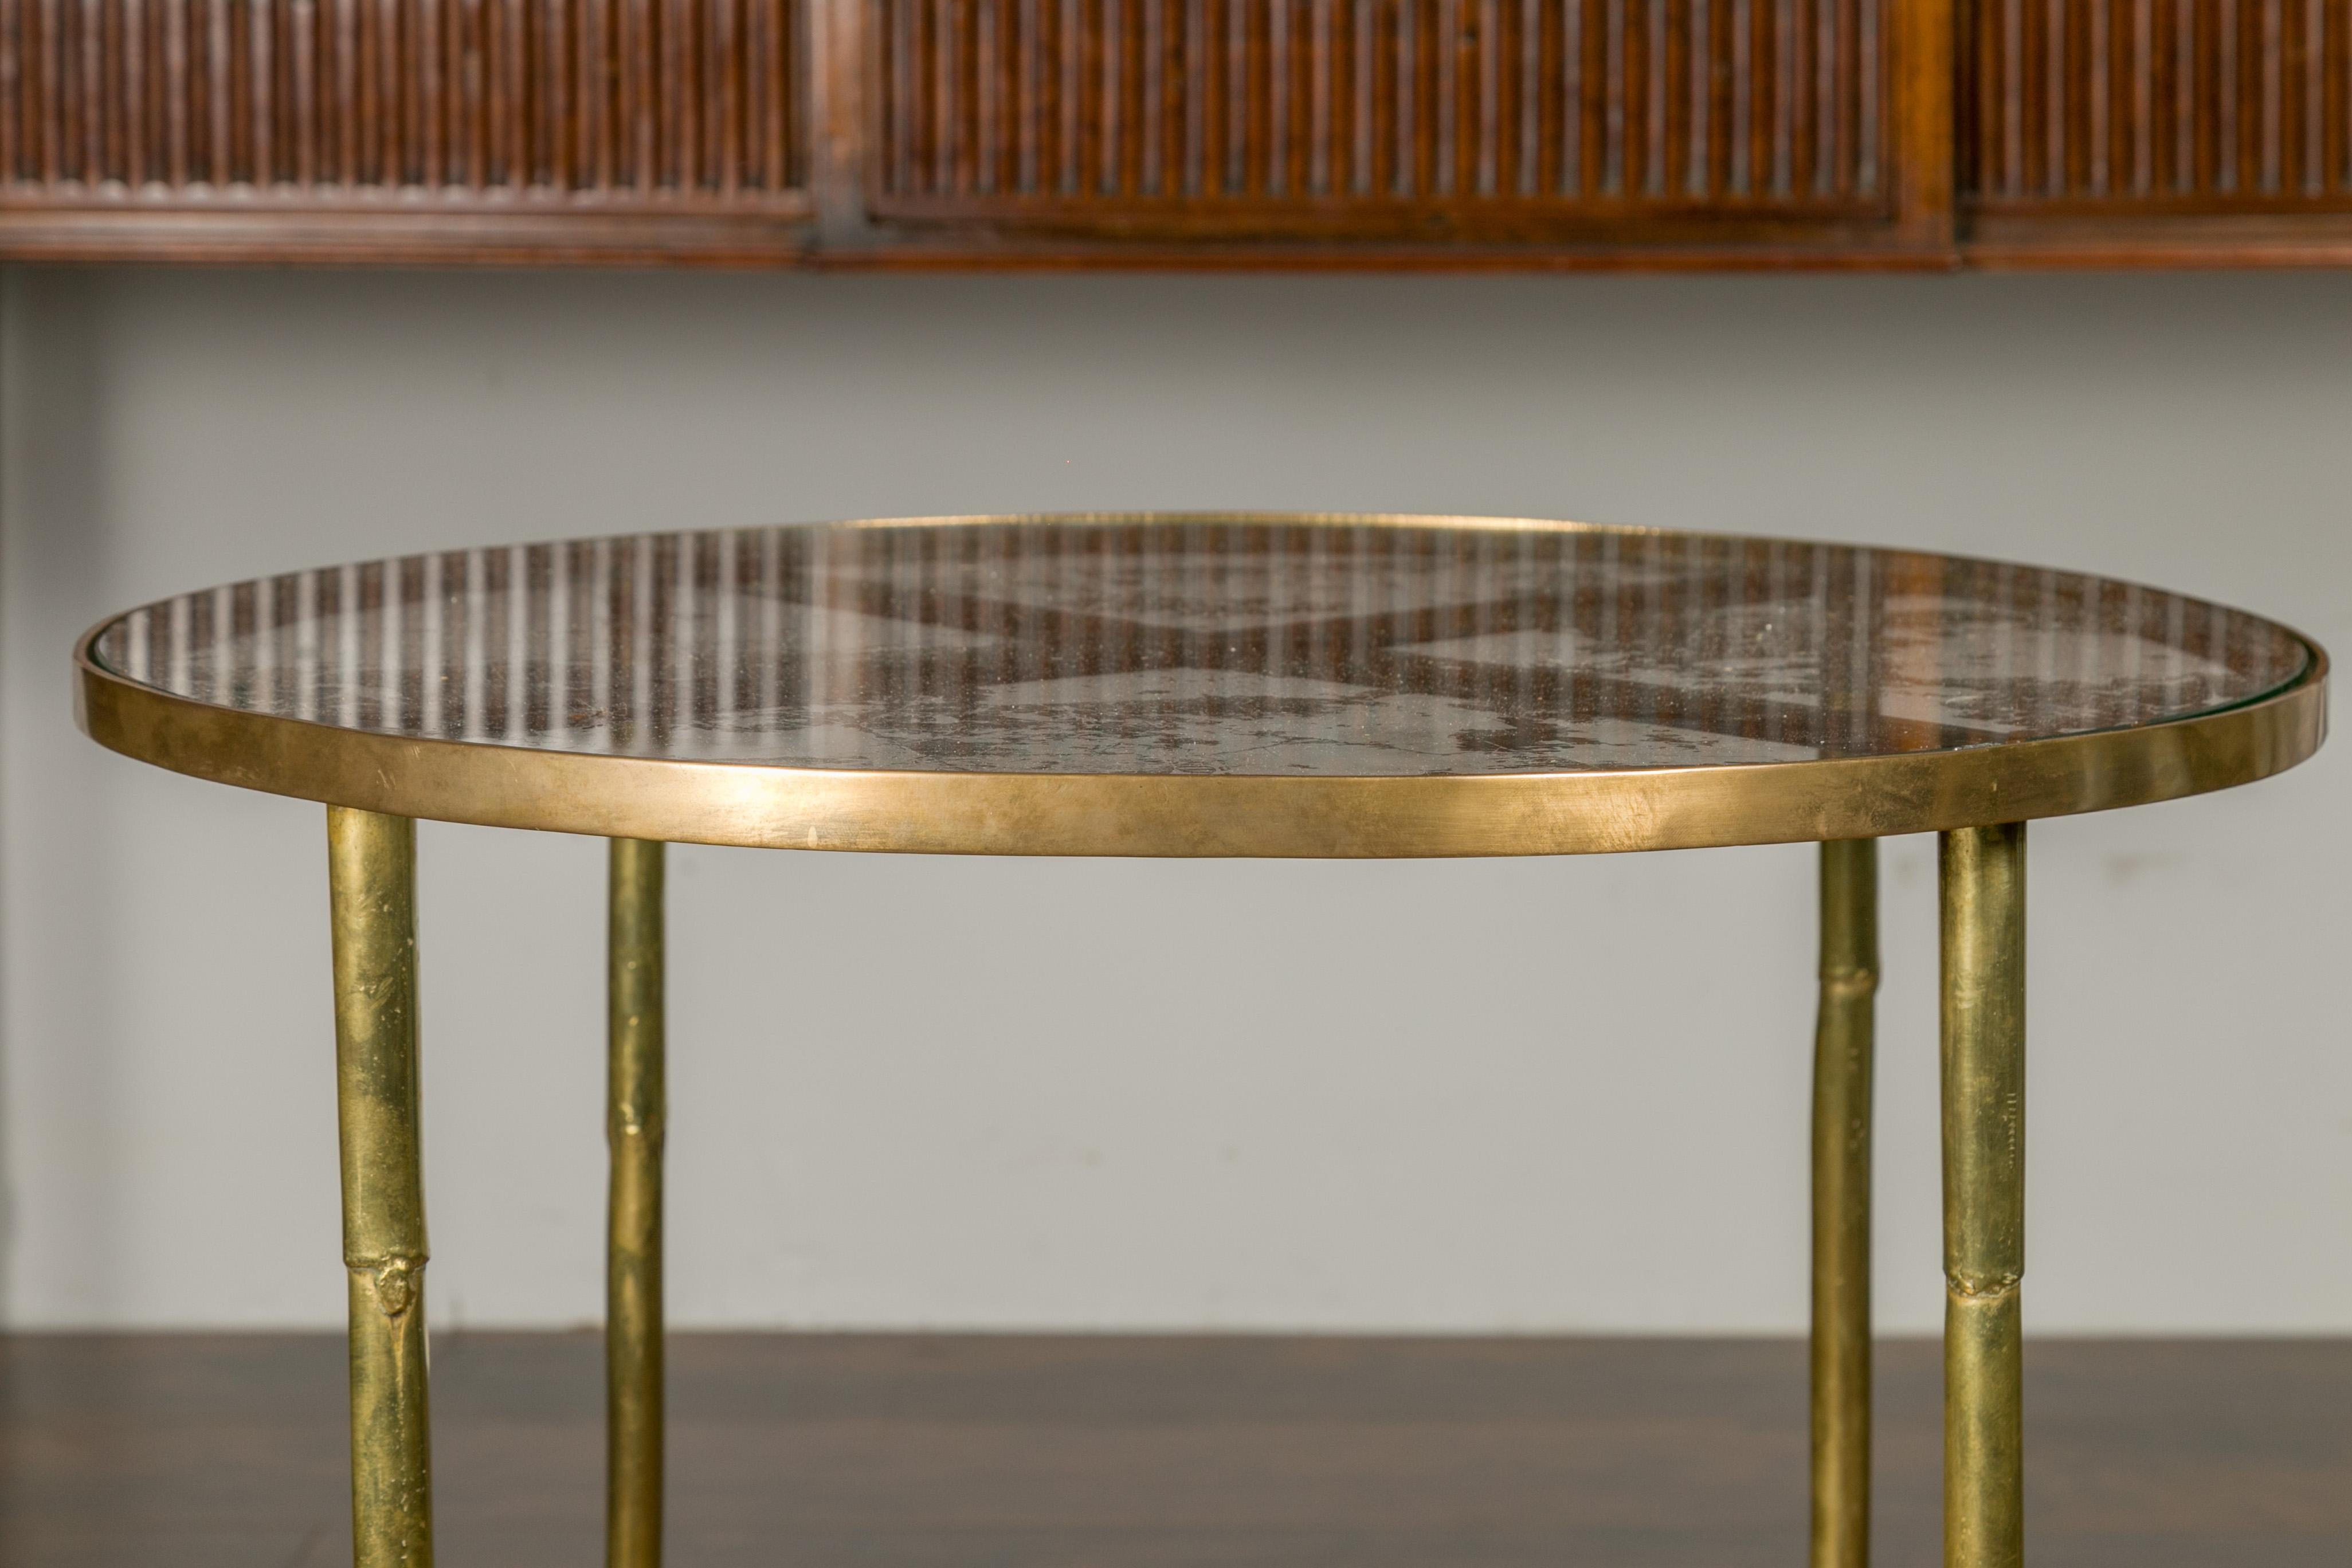 20th Century Italian Midcentury Brass Bamboo-Inspired Side Table with Distressed Glass Top For Sale